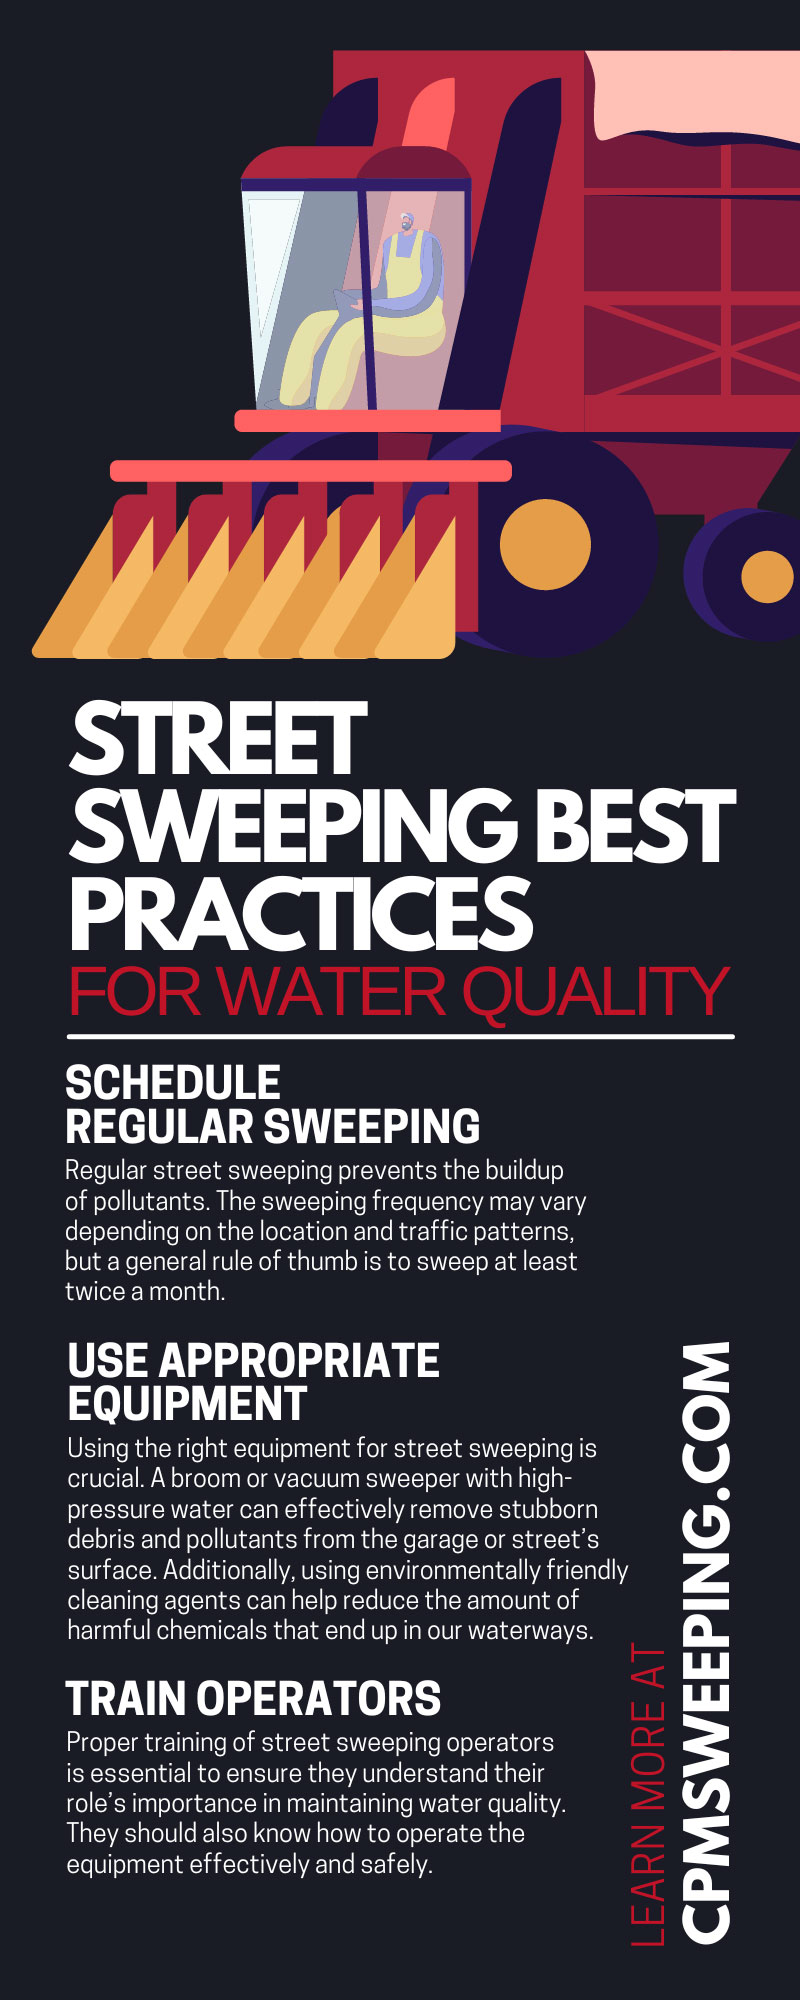 Street Sweeping Best Practices for Water Quality